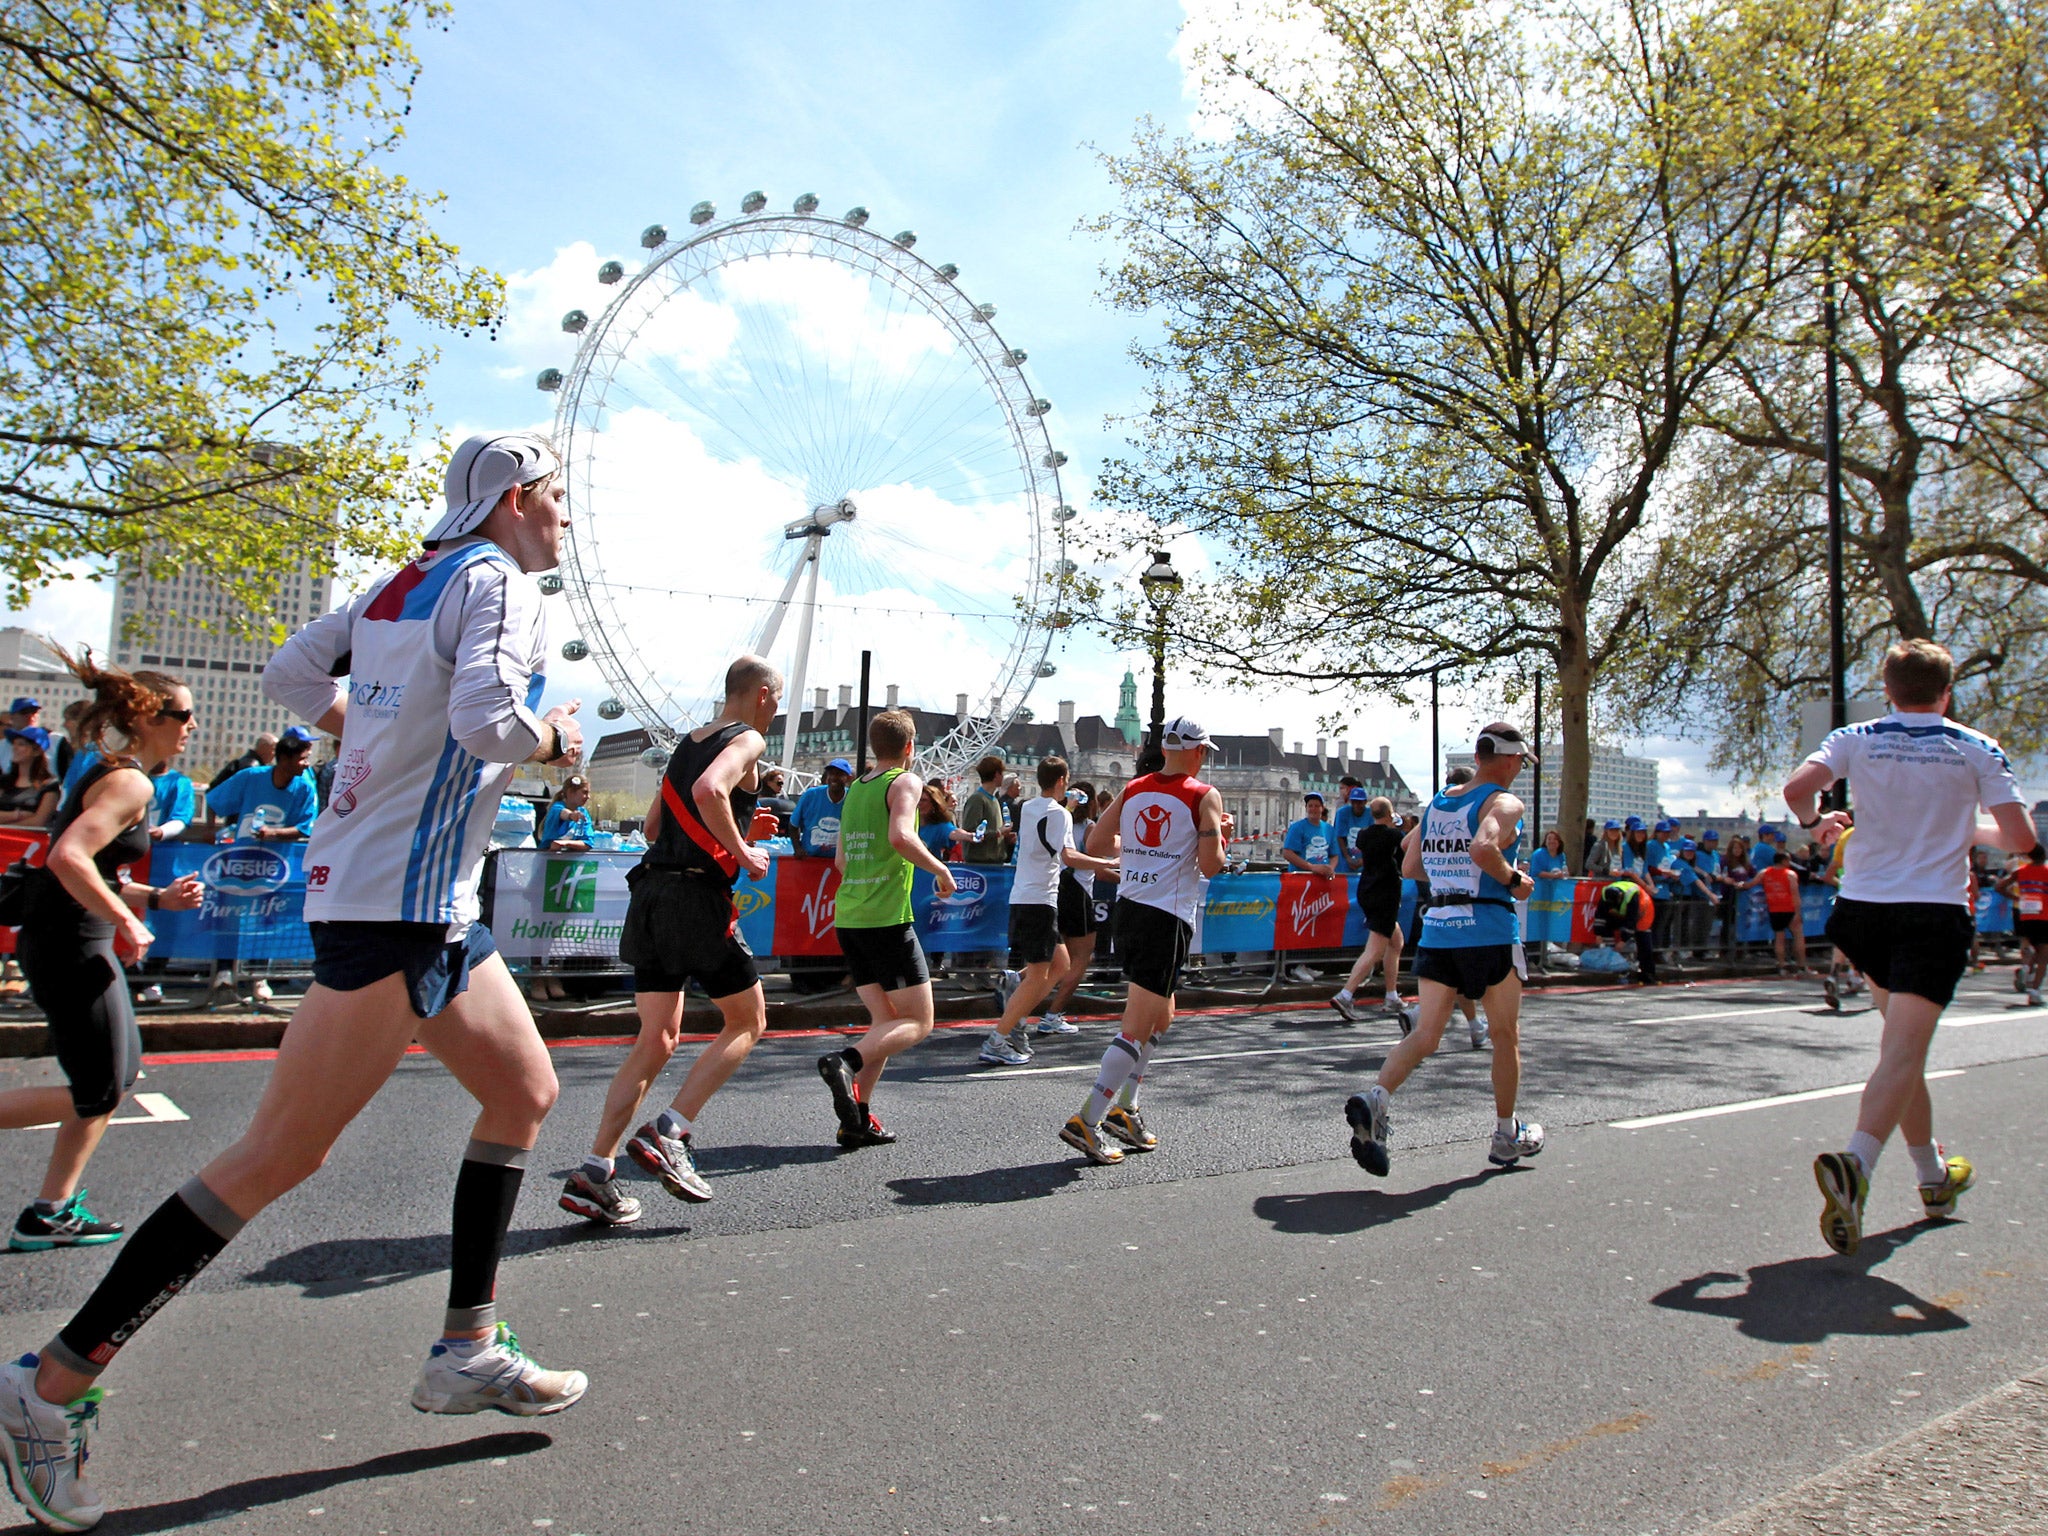 Vehicles will be kept away from the route of the London Marathon